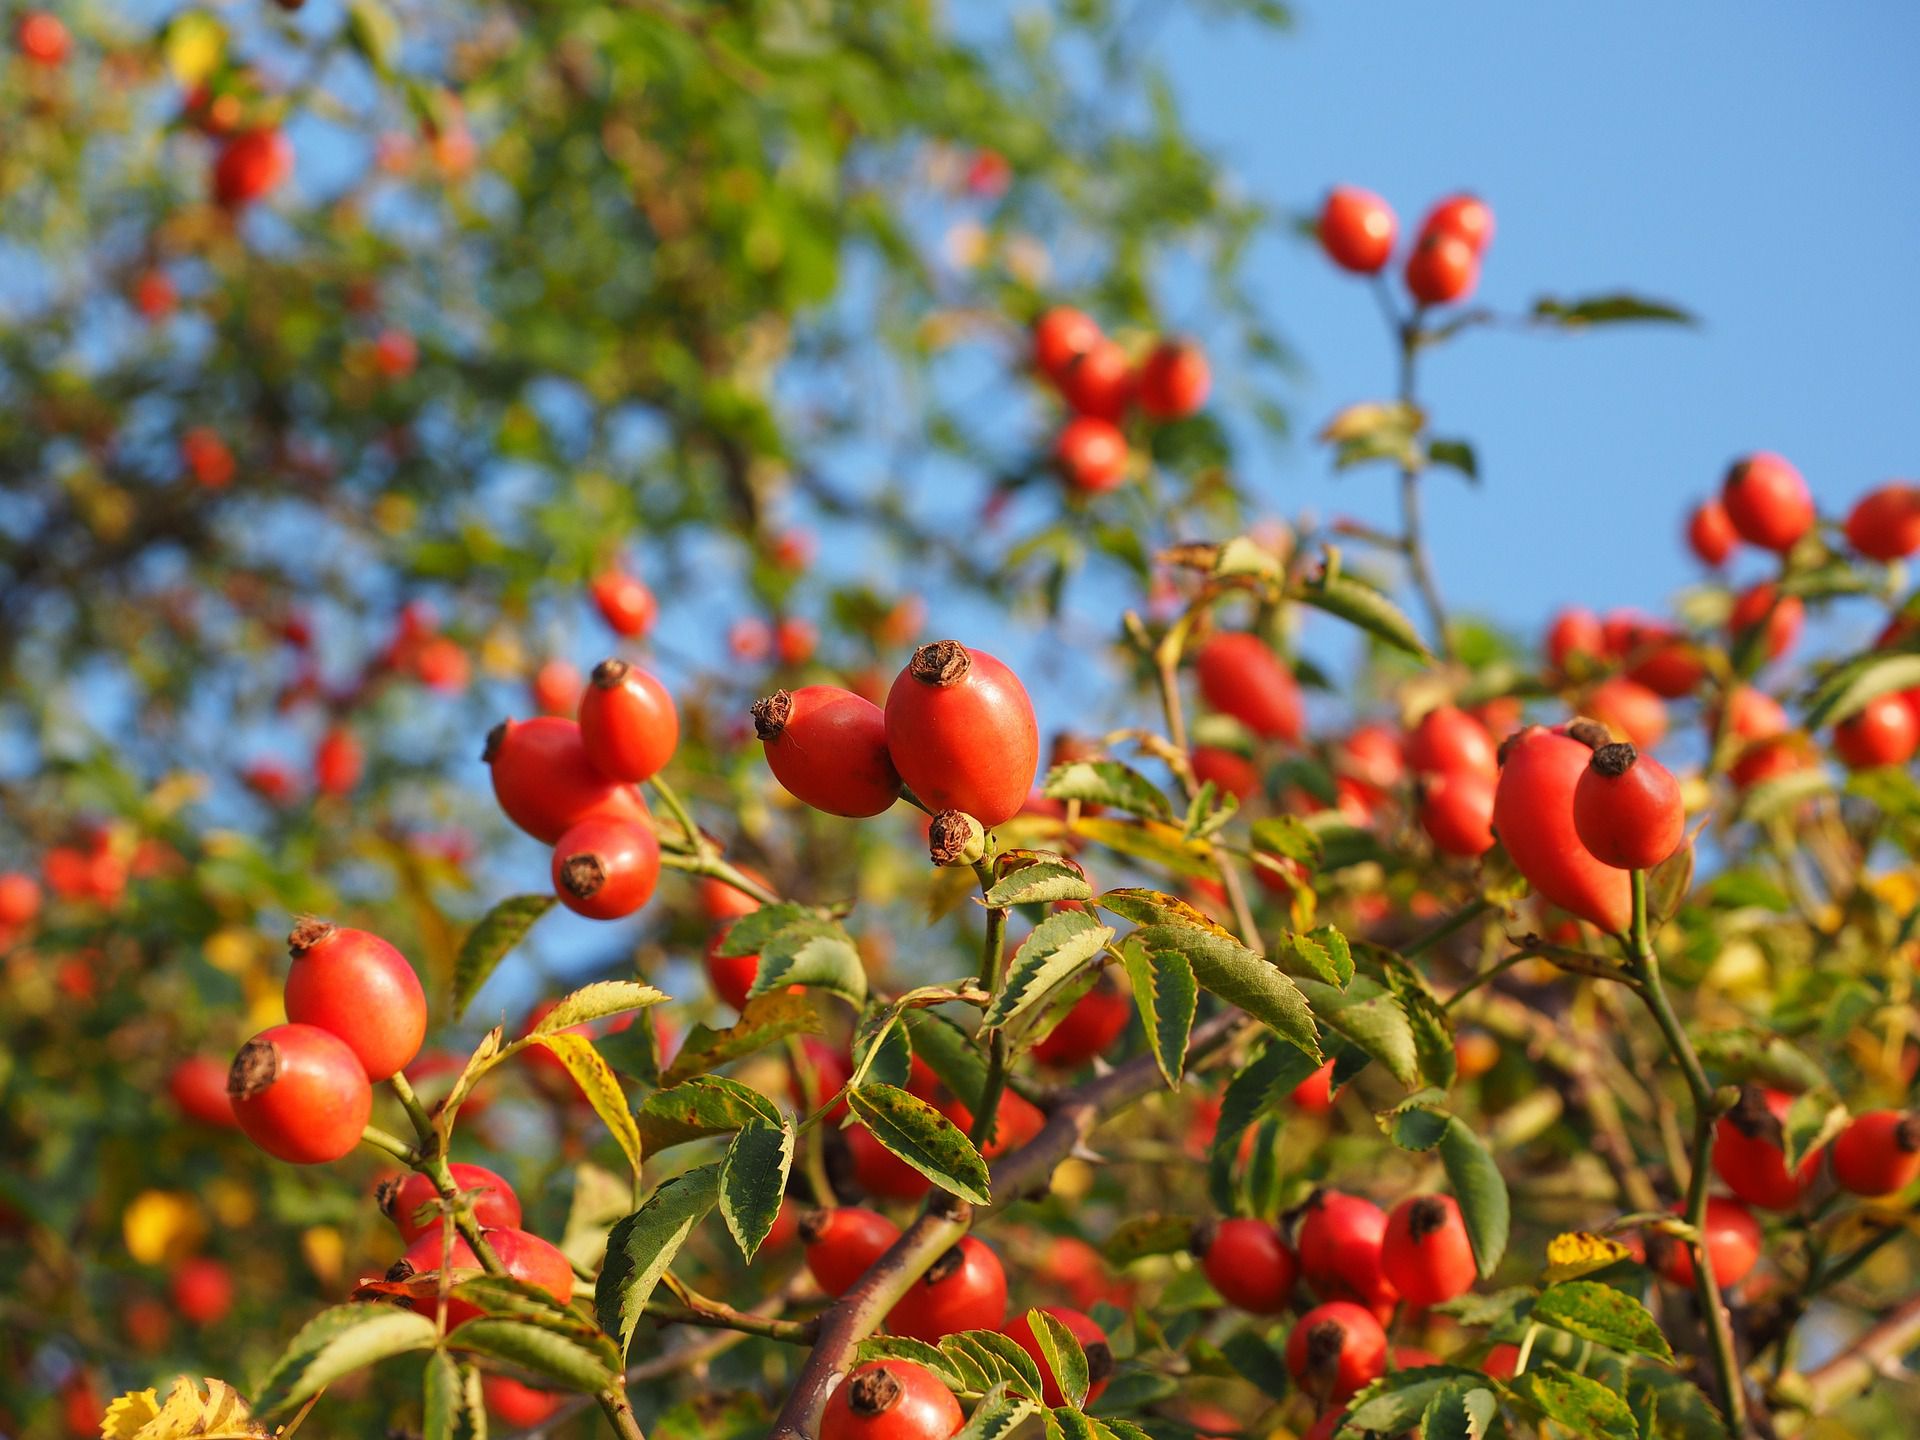 Rose Hips - What Are They and What Can You Do With Them?